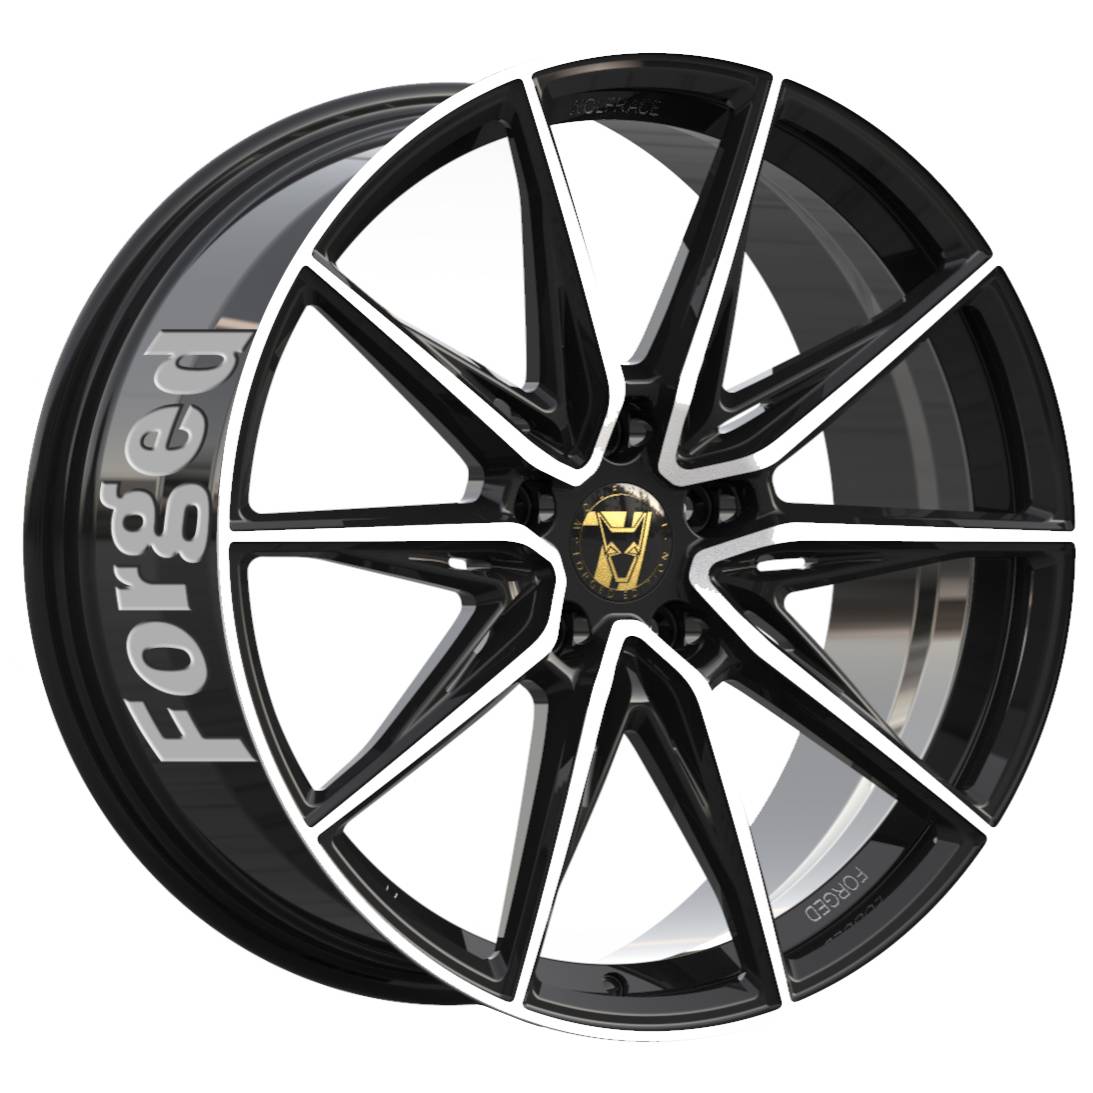 Demon Wheels 71 Forged Edition Urban Racer Forged [13x24] -5x130- ET 45